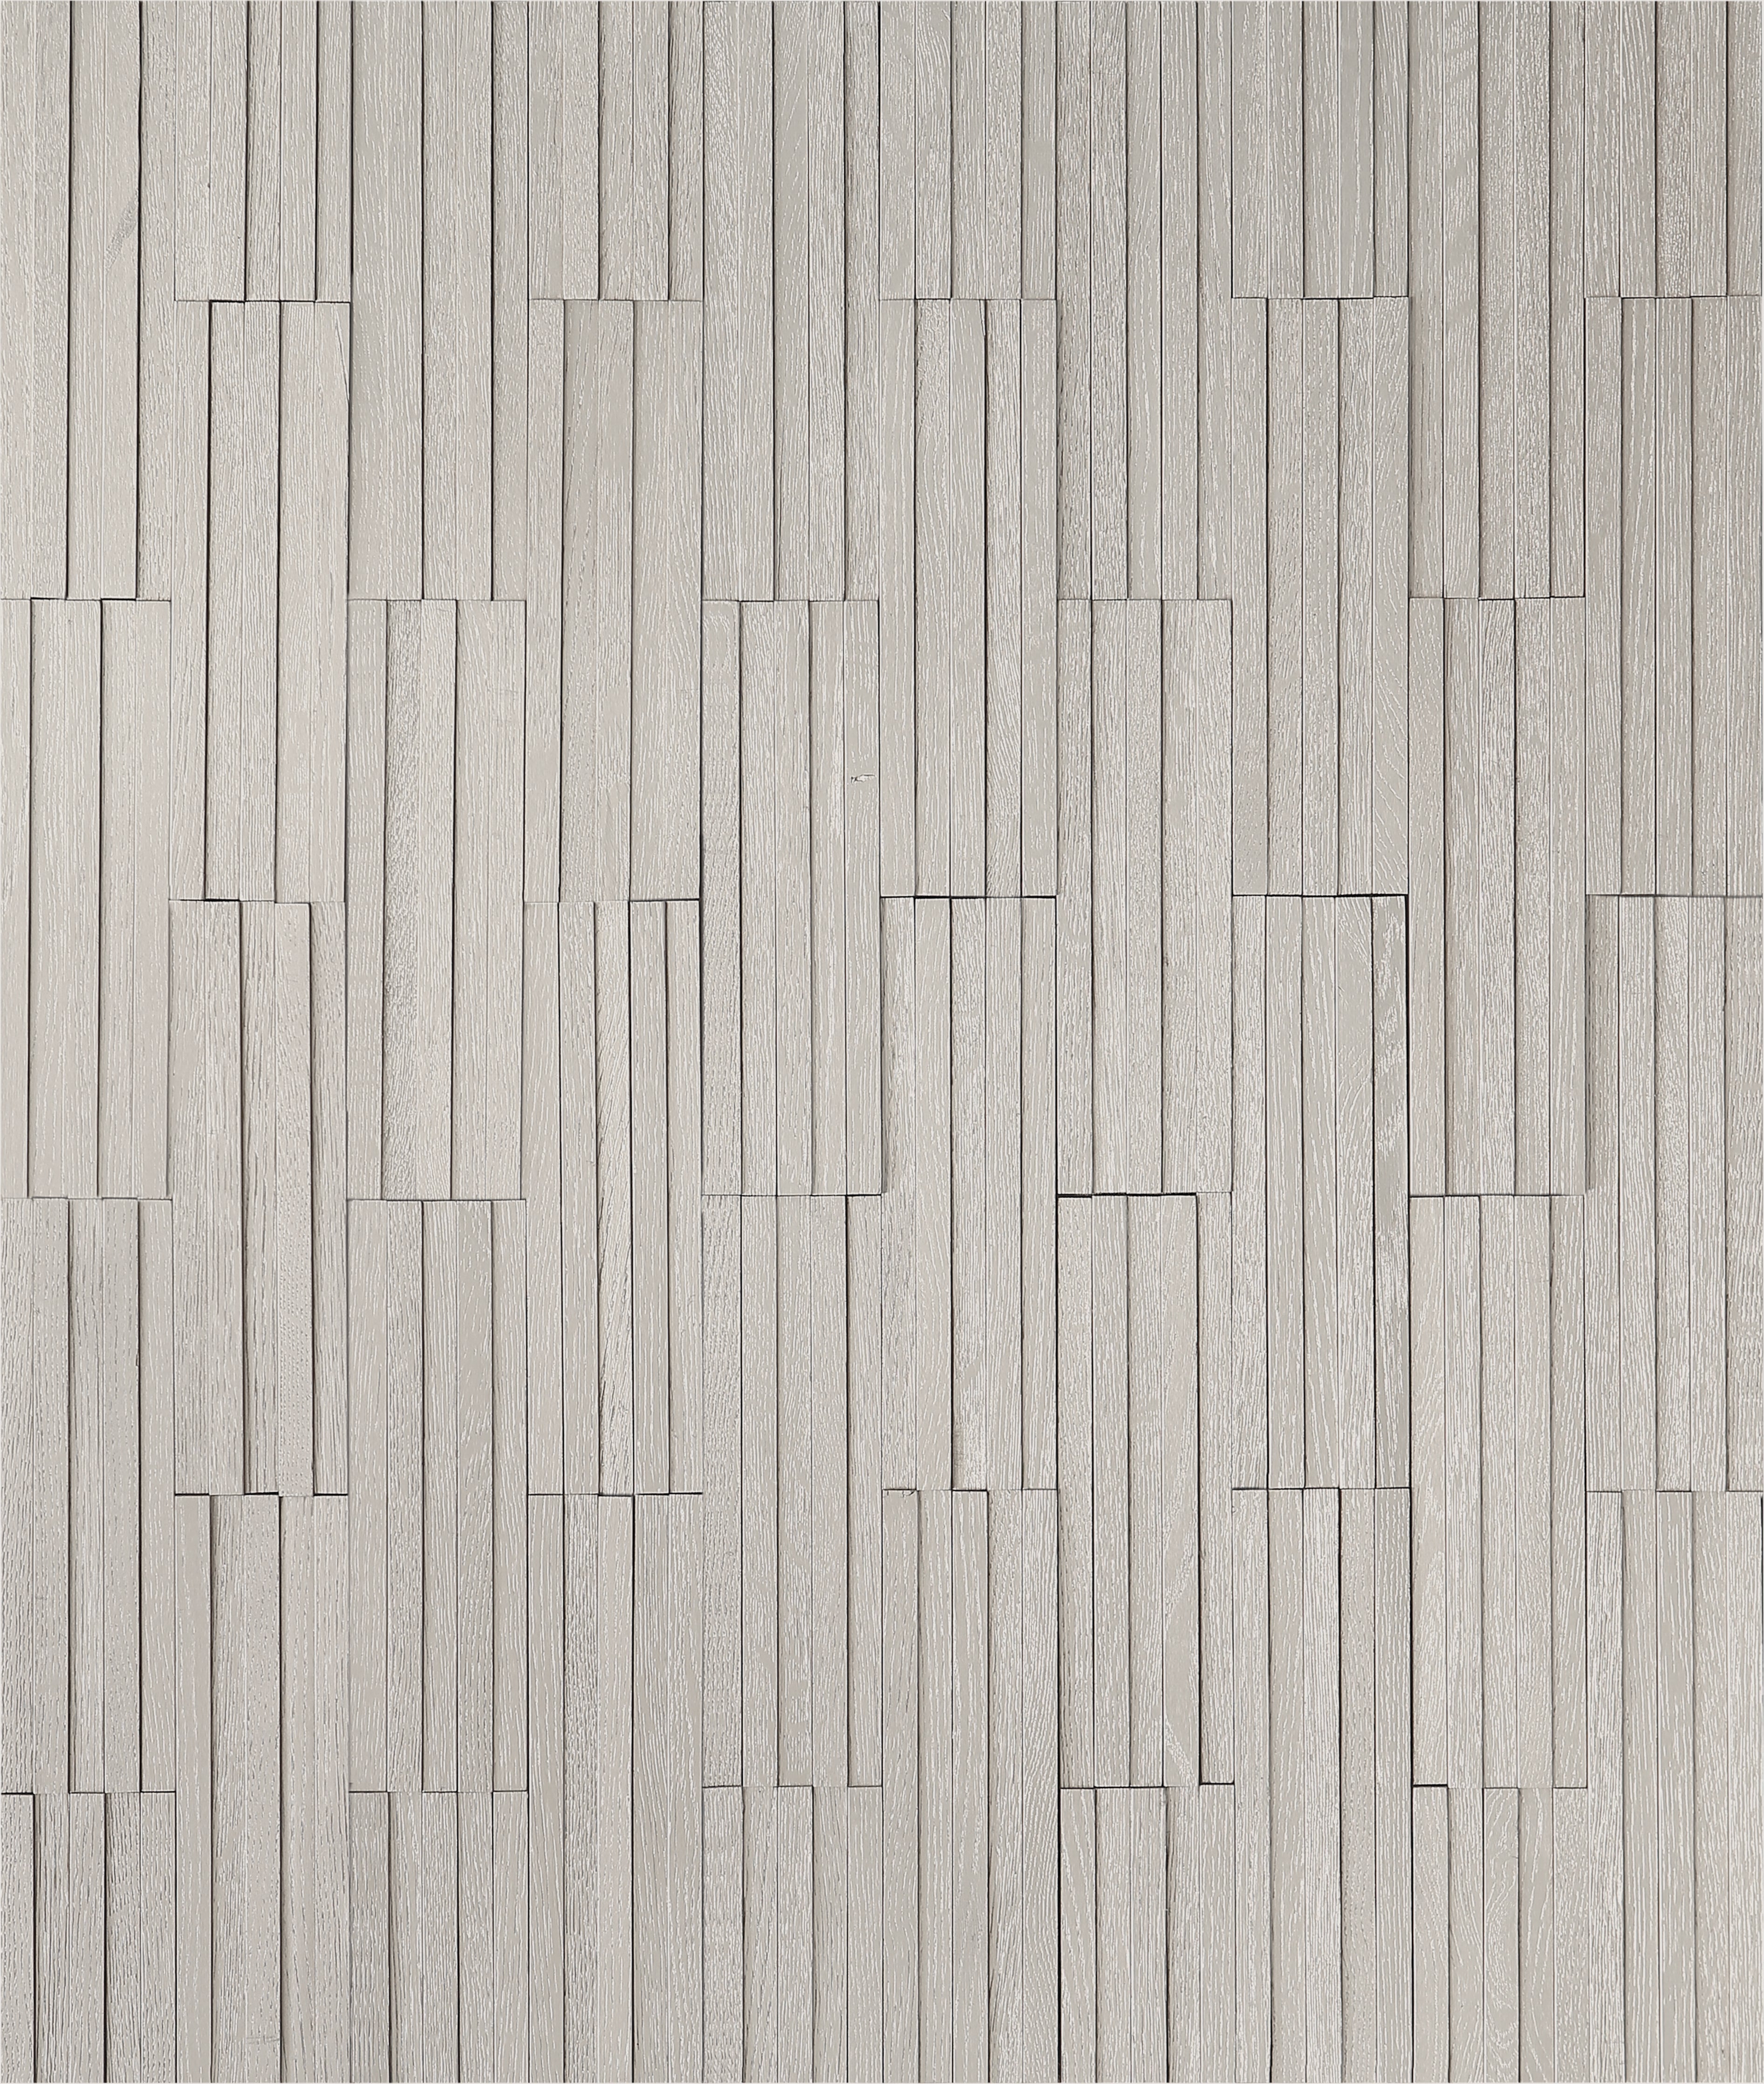 duchateau inceptiv parallels silver oak three dimensional wall natural wood panel lacquer for interior use distributed by surface group international